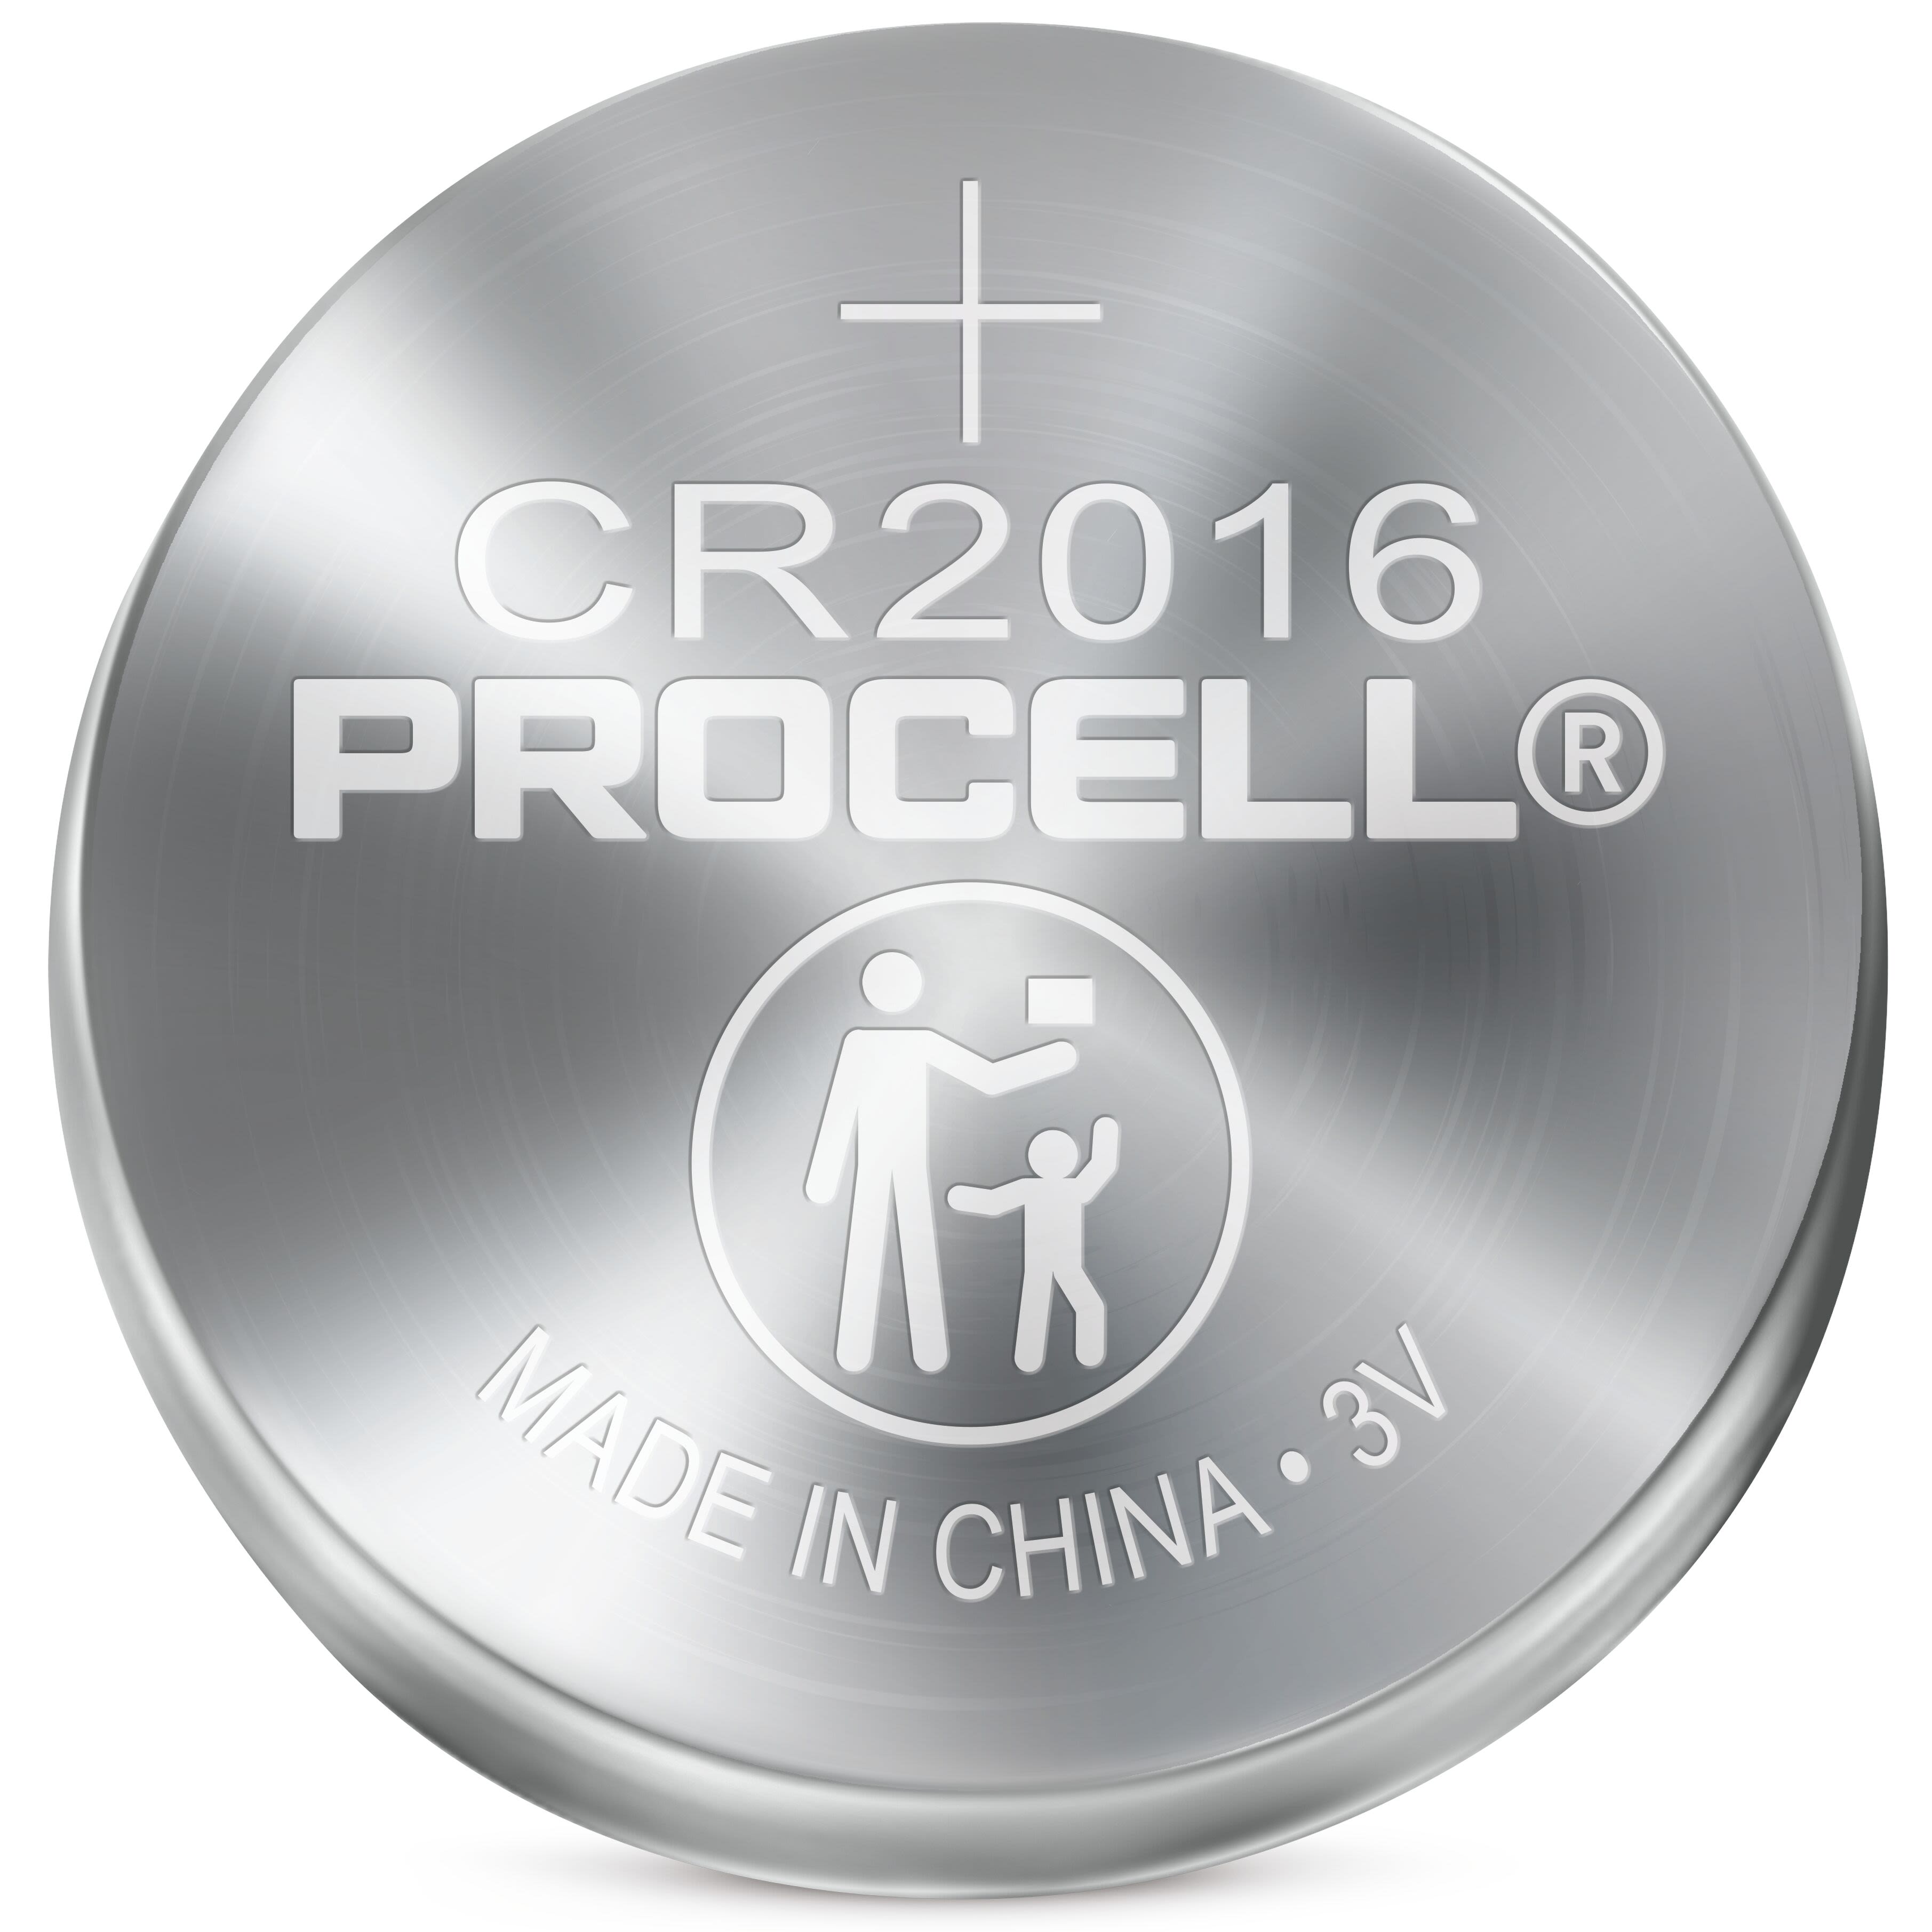 Duracell Procell CR2016 Button Battery, 3V